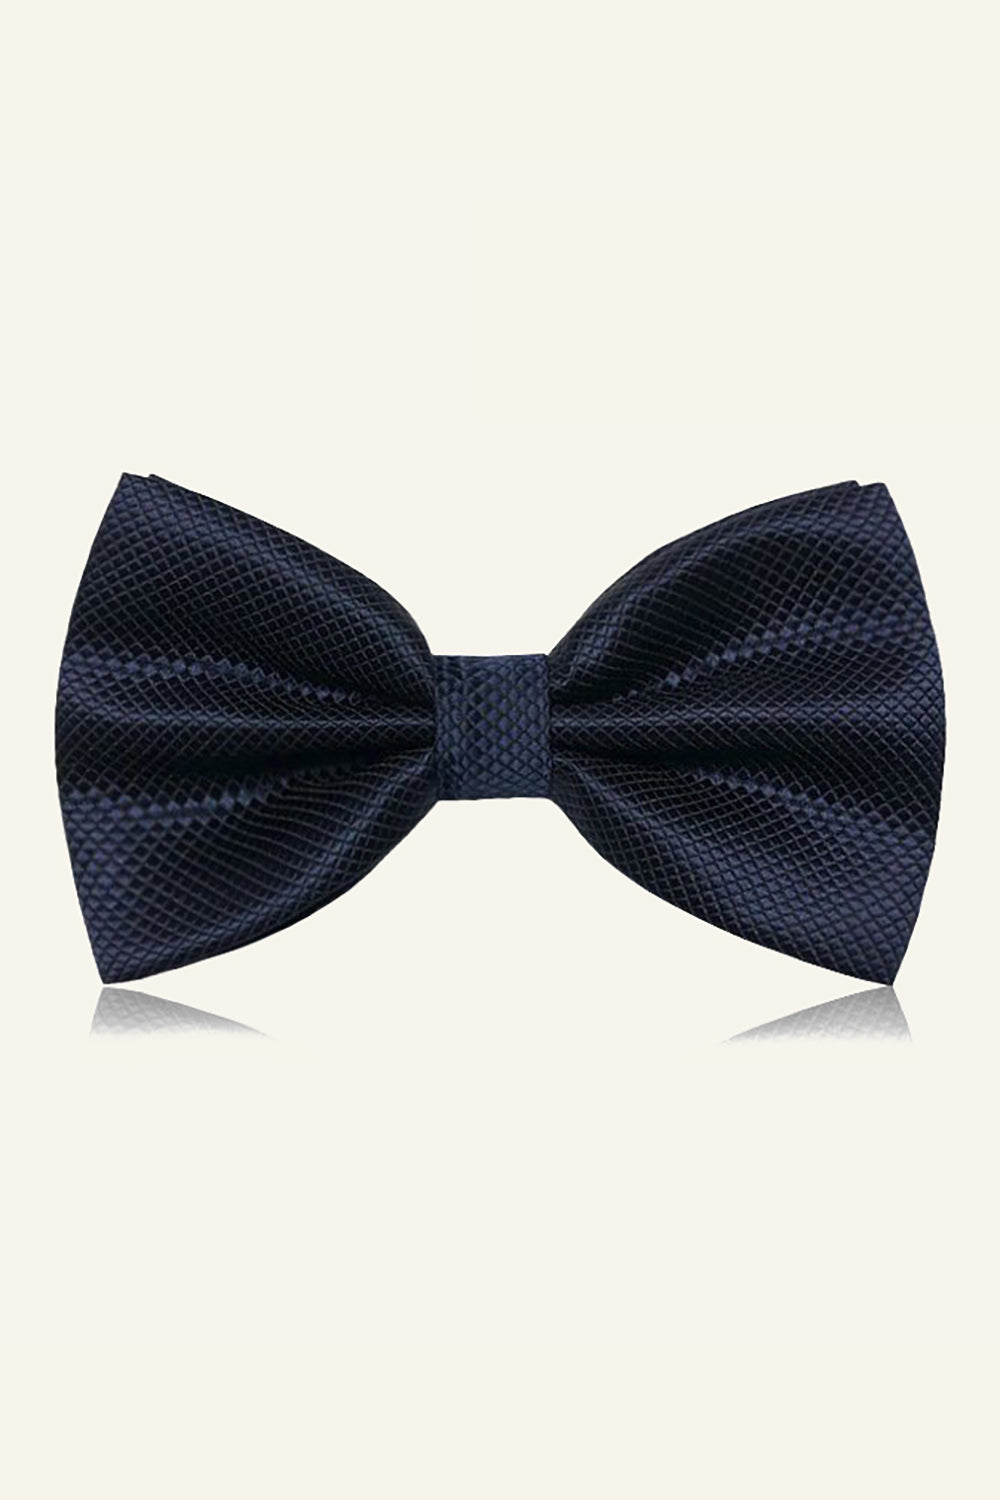 Red Men's Bow Tie For Party